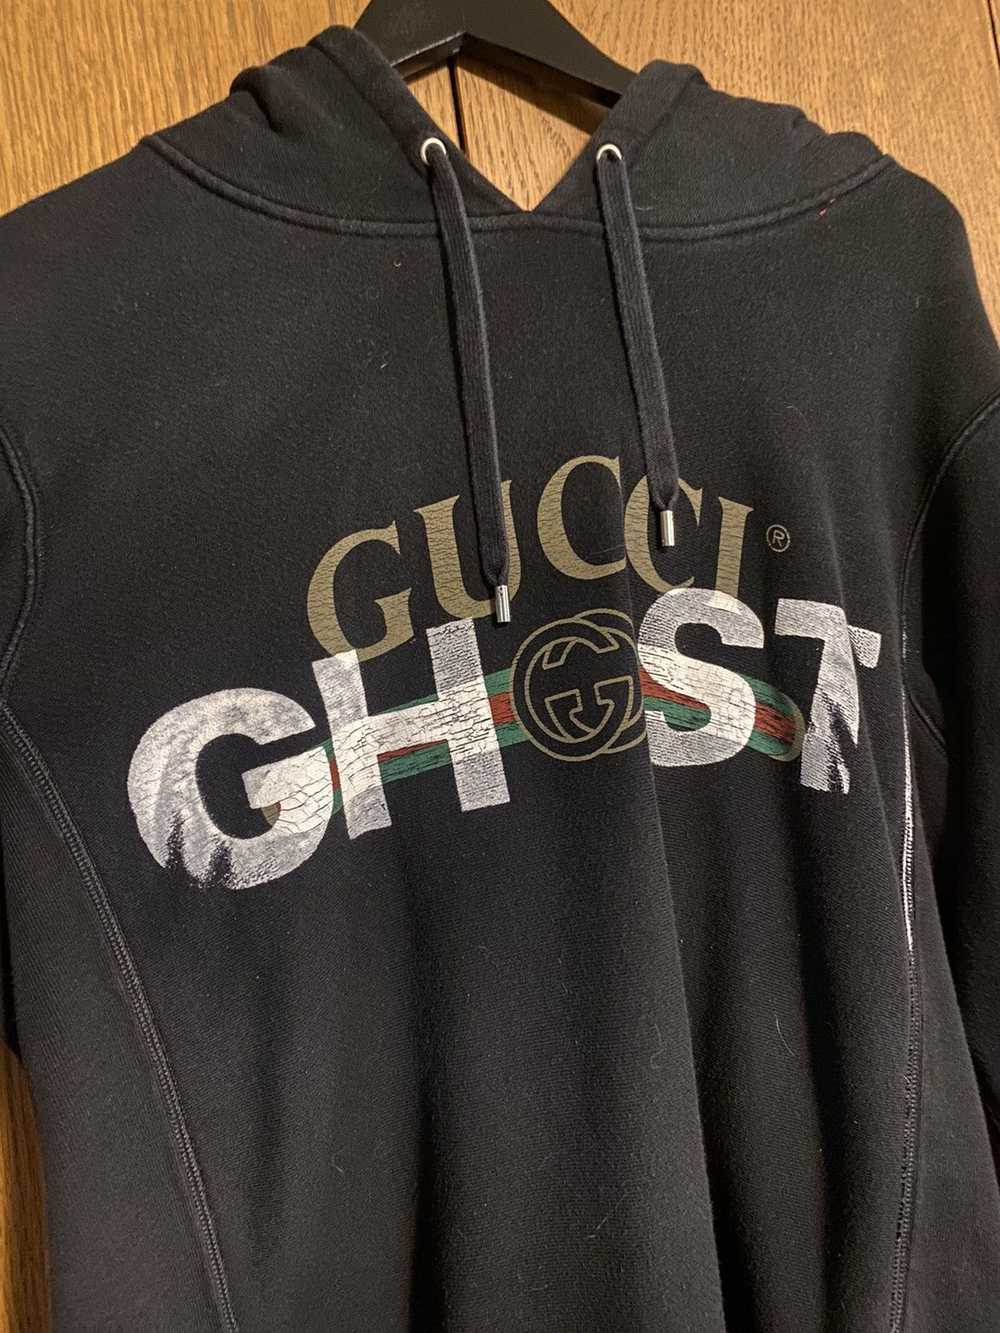 Gucci 1/1 Gucci GHOST Hand Painted Hoodie - image 4